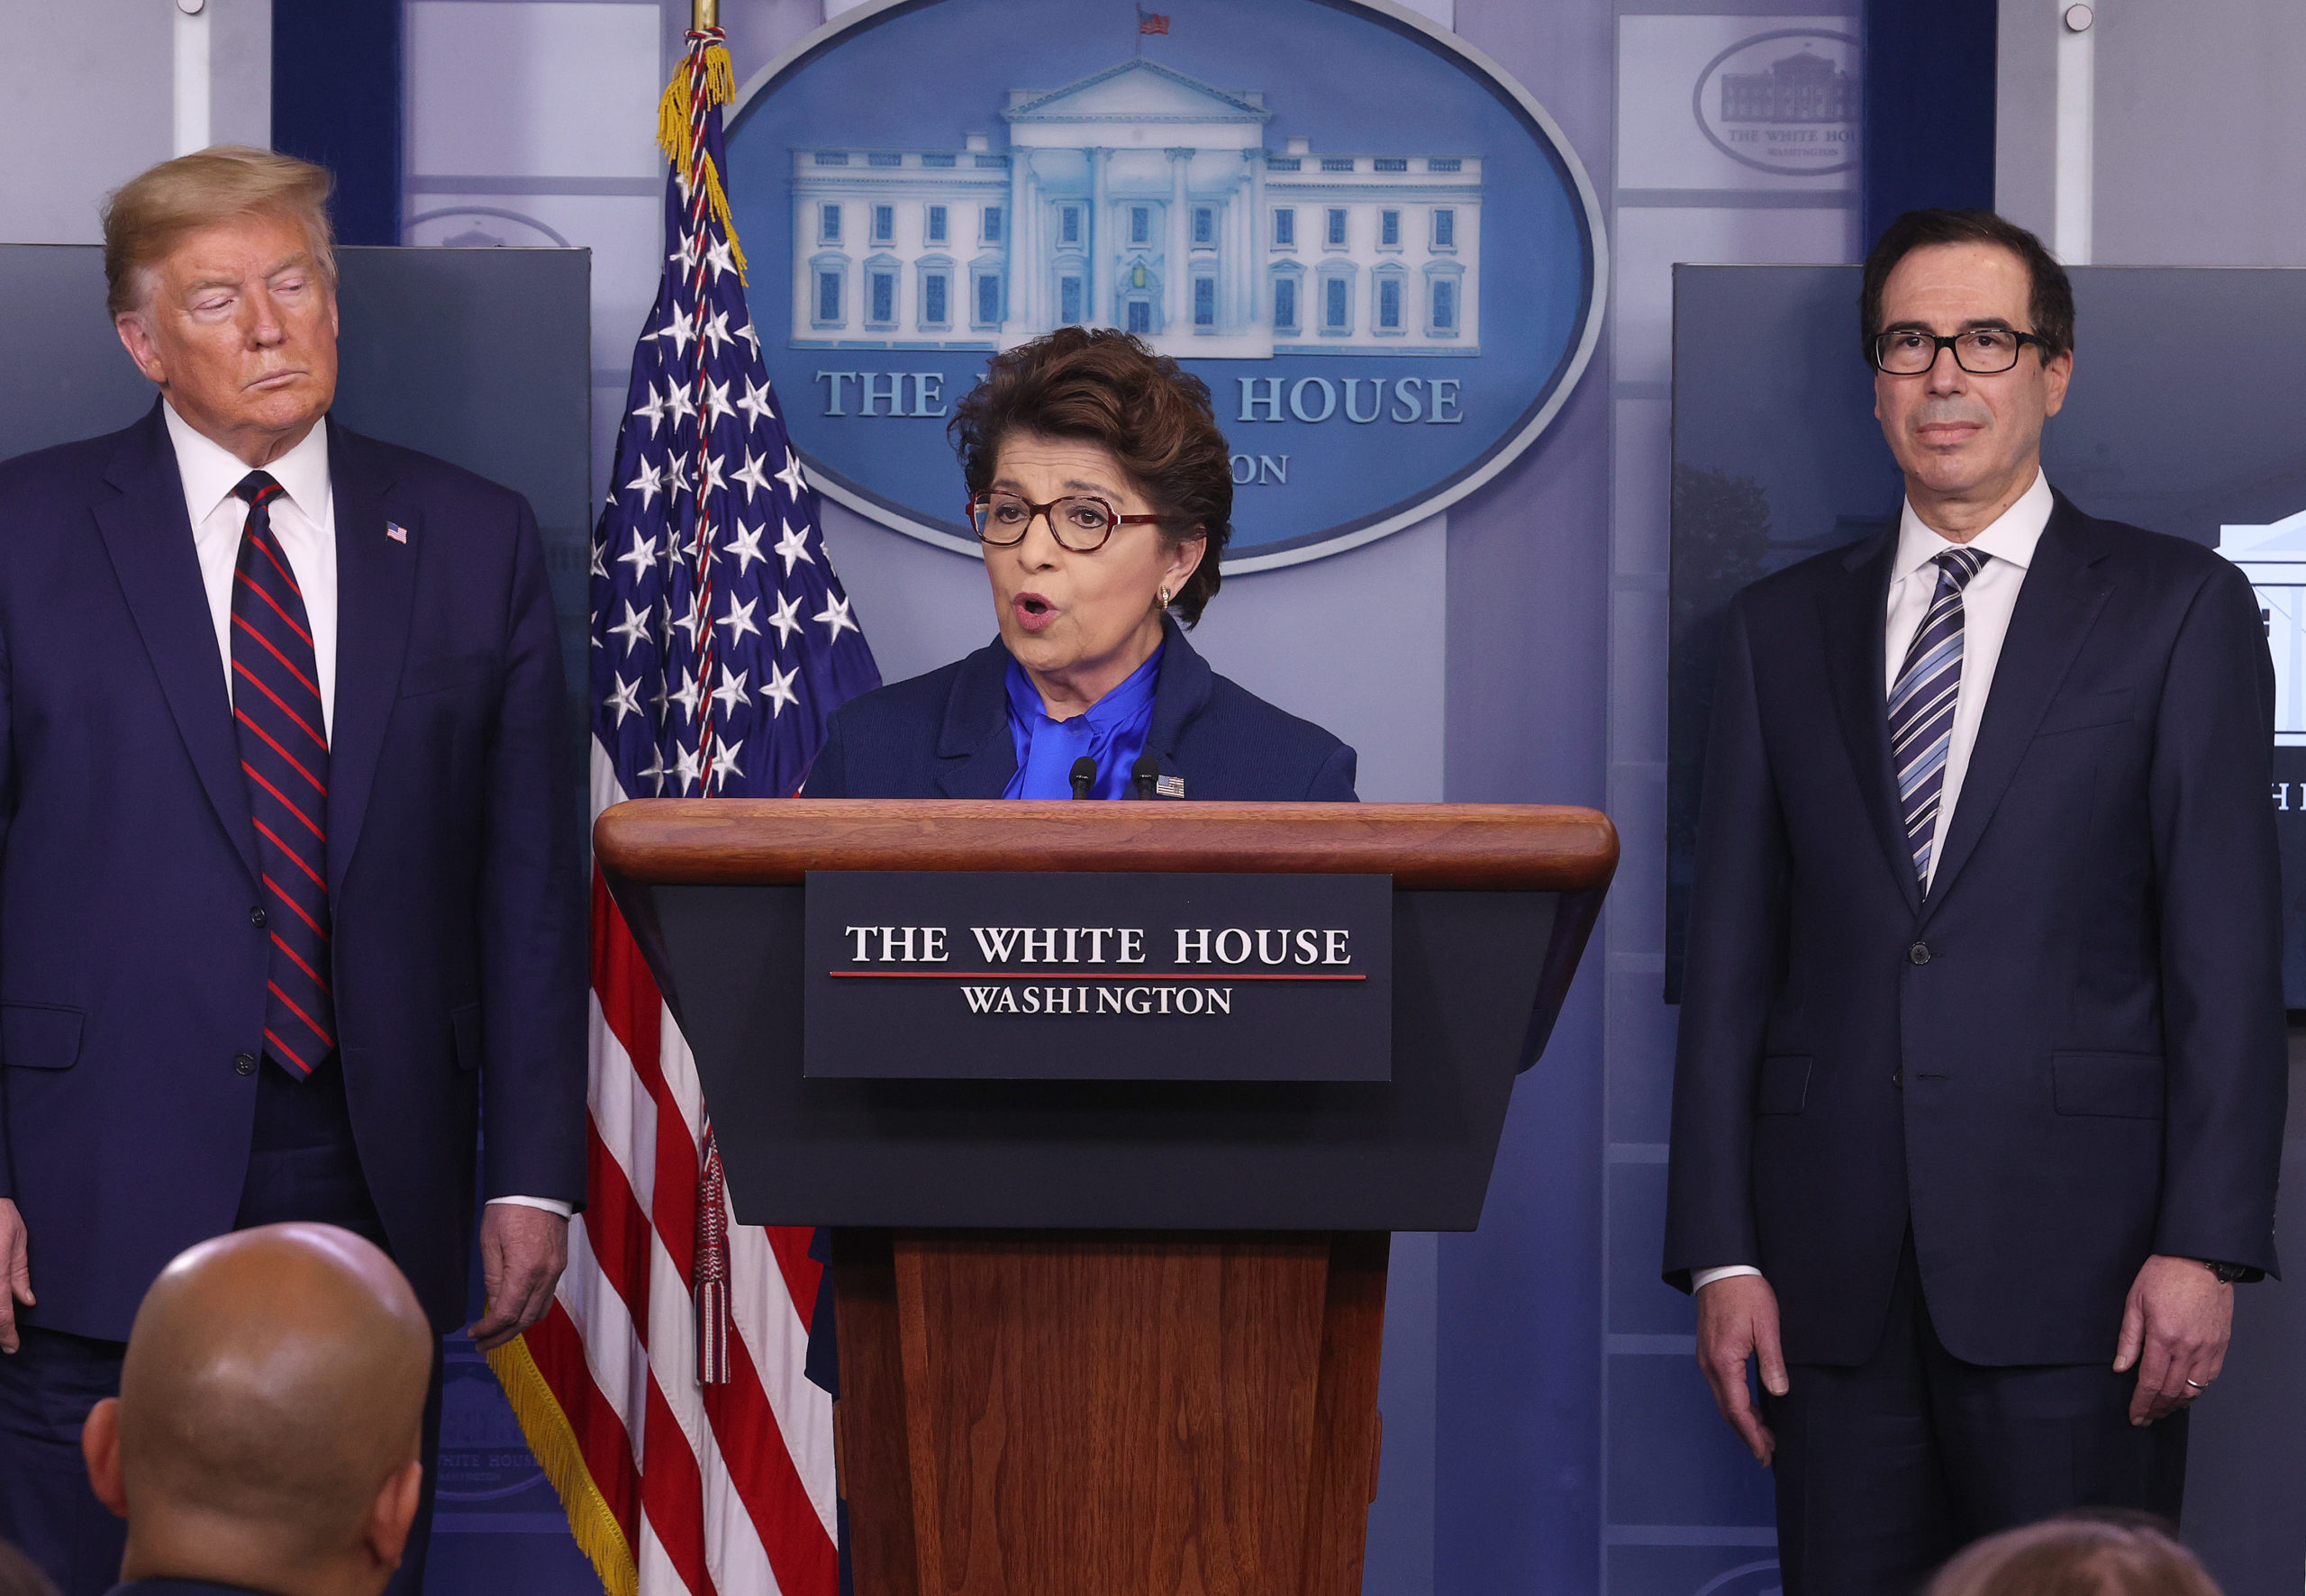 WASHINGTON, DC - APRIL 02: Small Business Administrator, Jovita Carranza speaks while flanked by U.S. President Donald Trump and Secretary of Treasury Steve Mnuchin (R) in the press briefing room with members of the White House Coronavirus Task Force April 2, 2020 in Washington, DC. The U.S. government reported an unprecedented 6.6 million jobless claims this morning as a result of the coronavirus outbreak. (Photo by Win McNamee/Getty Images)